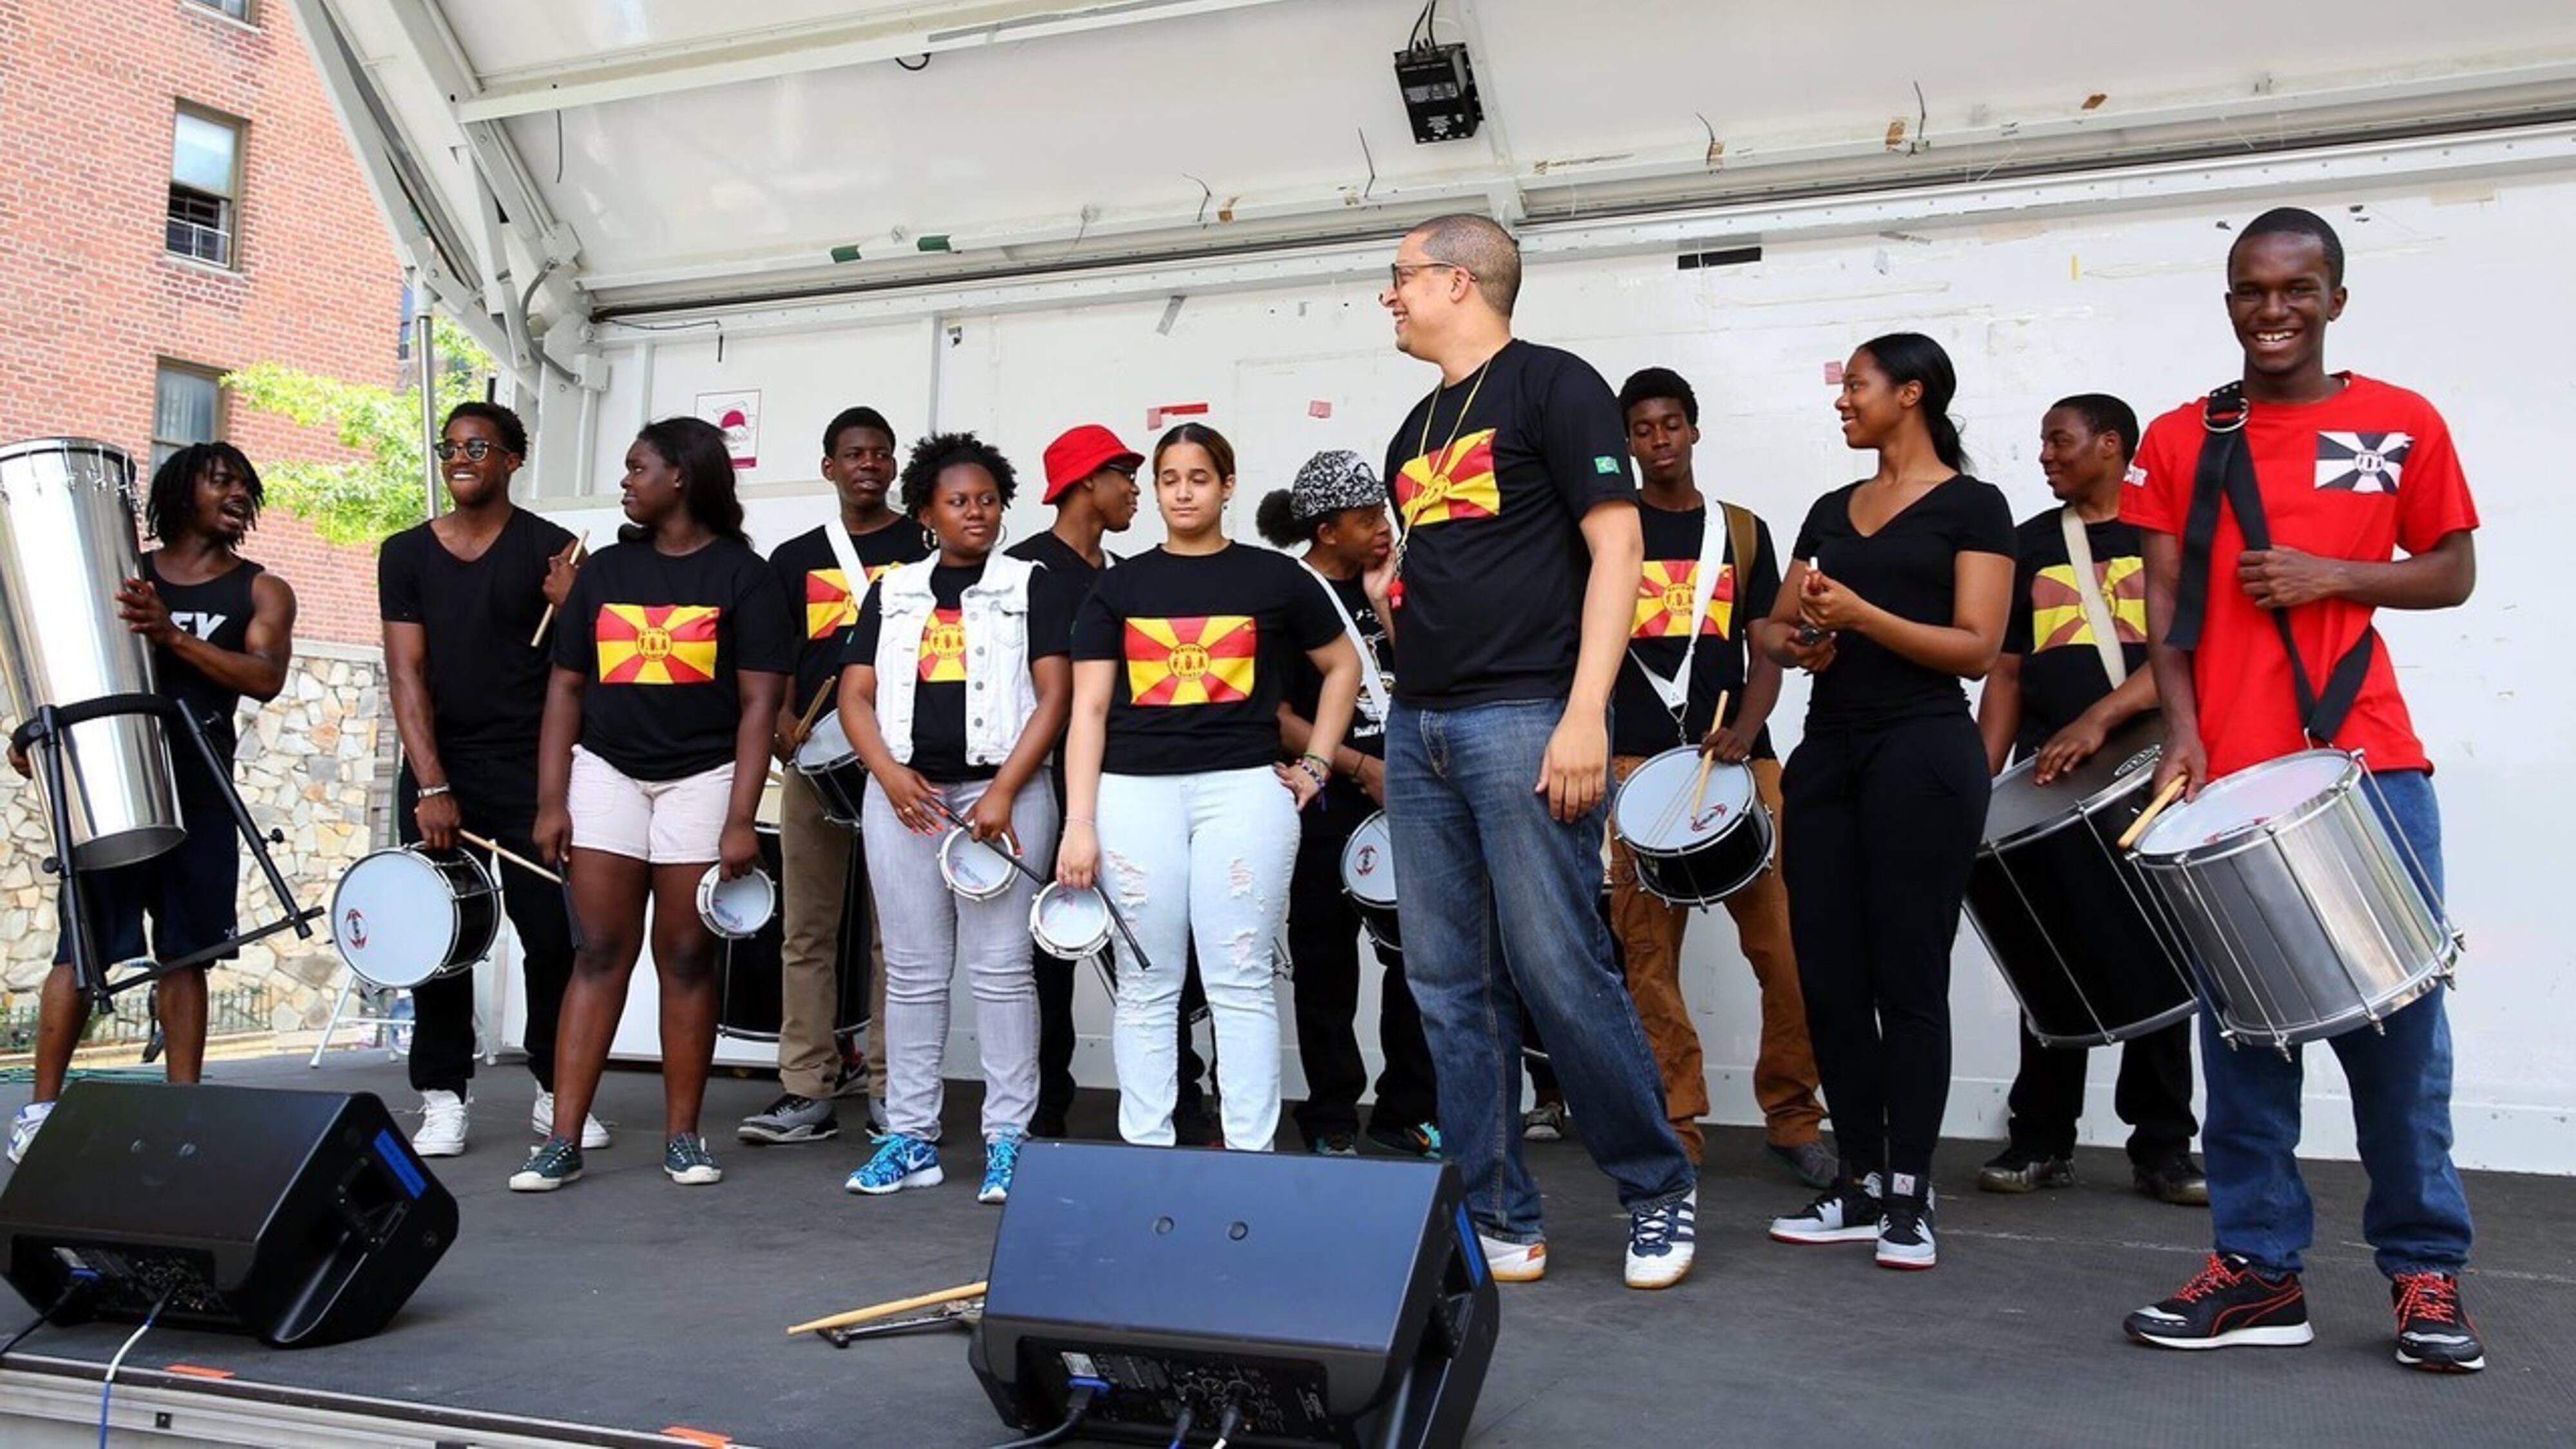 Students and members of Harlem Samba stand with their percussion instruments on a stage, most of them wearing black shirts with red and yellow flags.